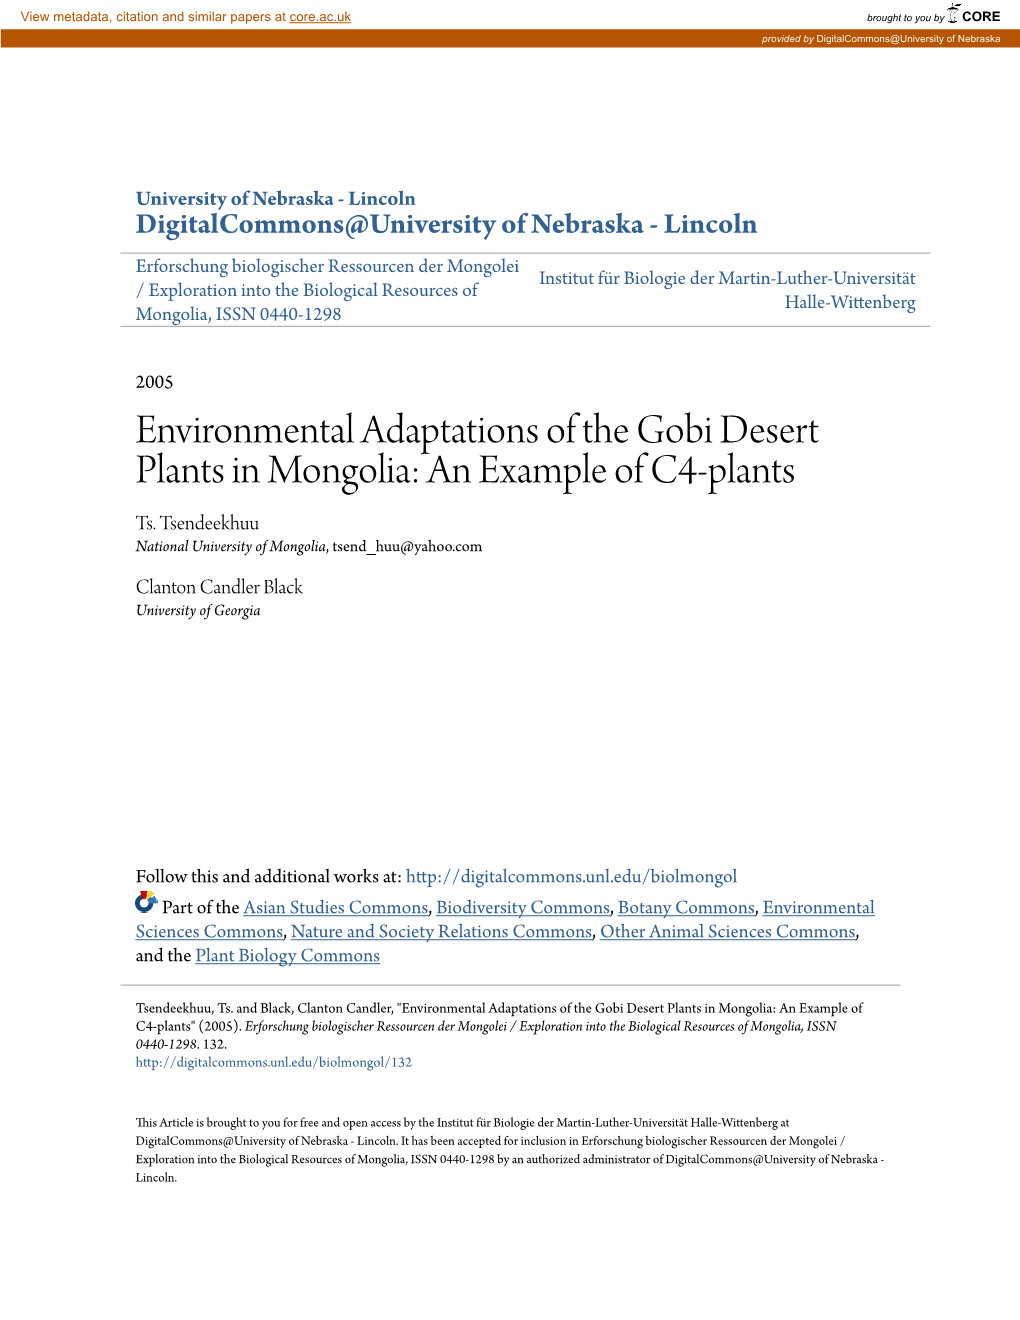 Environmental Adaptations of the Gobi Desert Plants in Mongolia: an Example of C4-Plants Ts